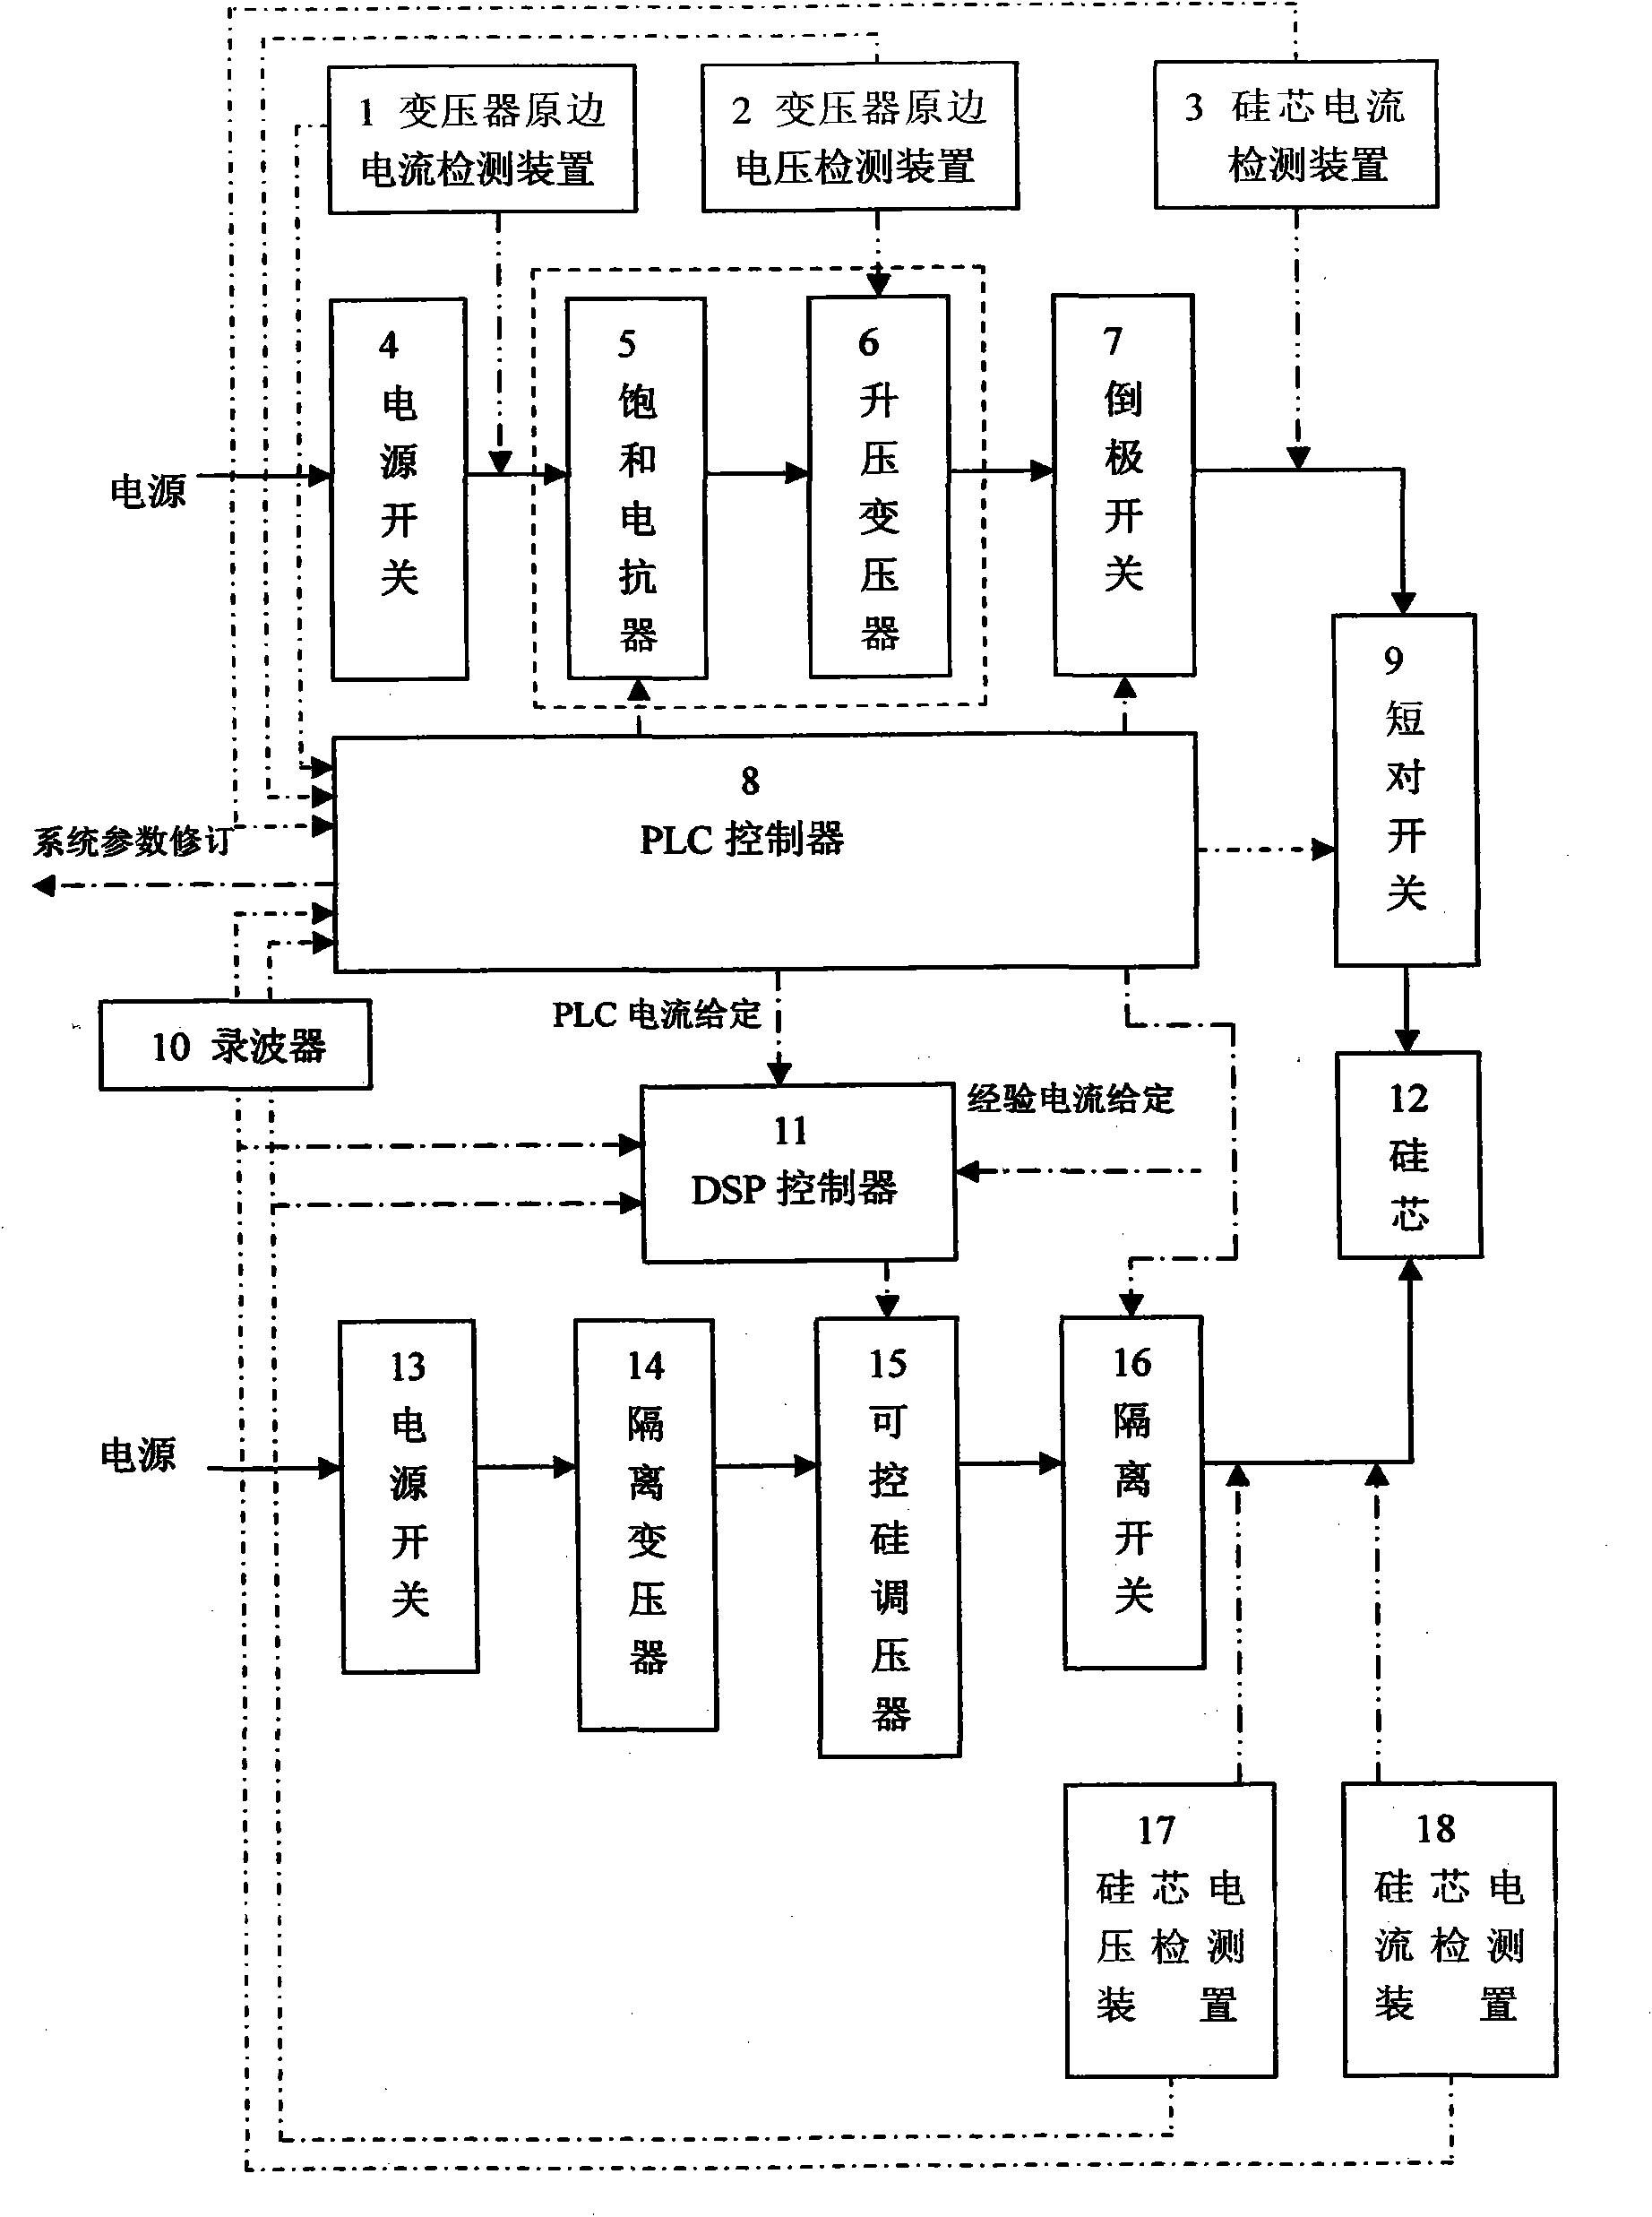 Automatic power regulation device for polysilicon reducing furnace